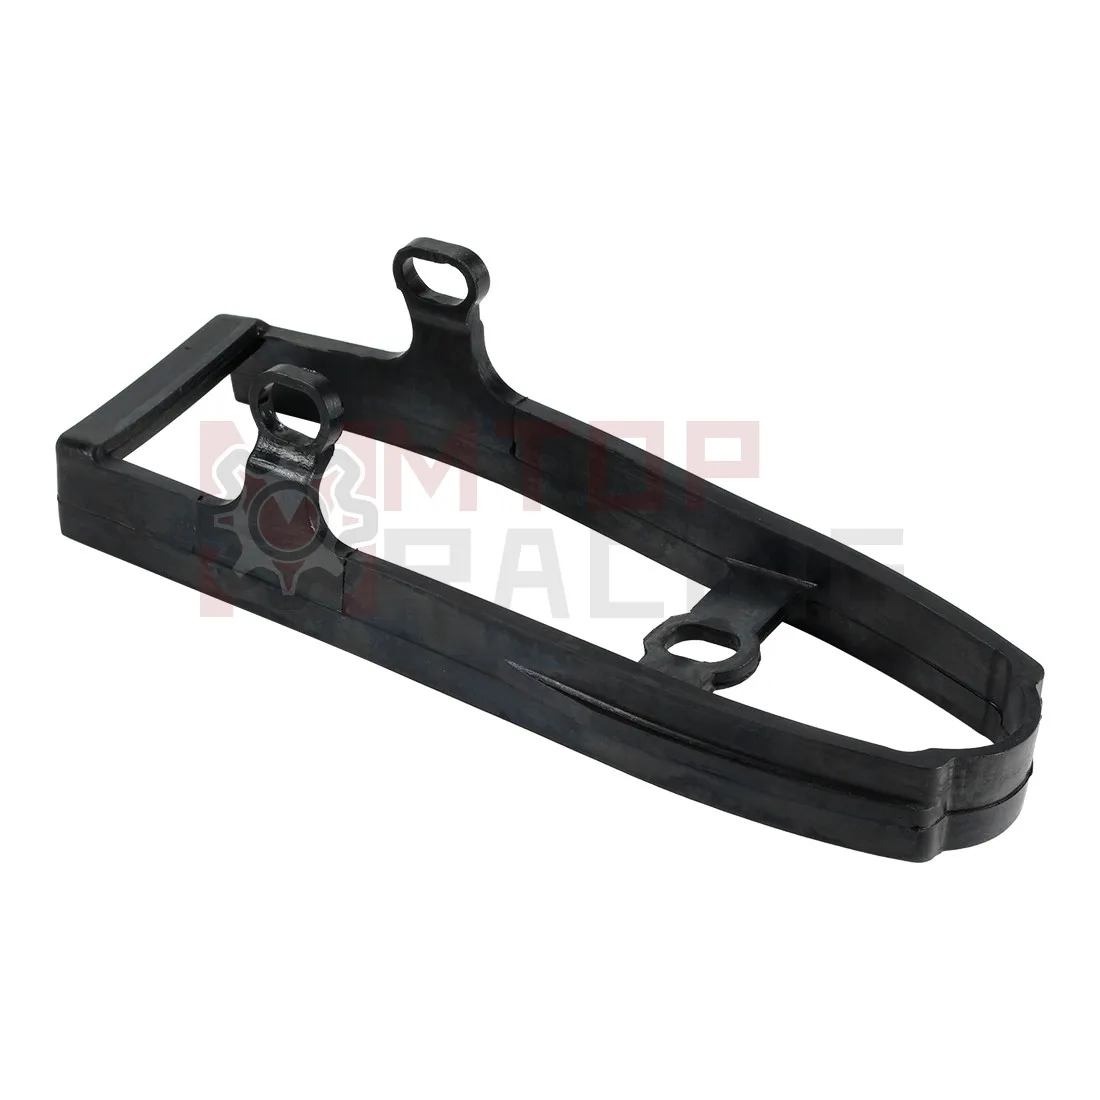 Swingarm Protector | Chain Slider | Chain/belt Guards Guides 